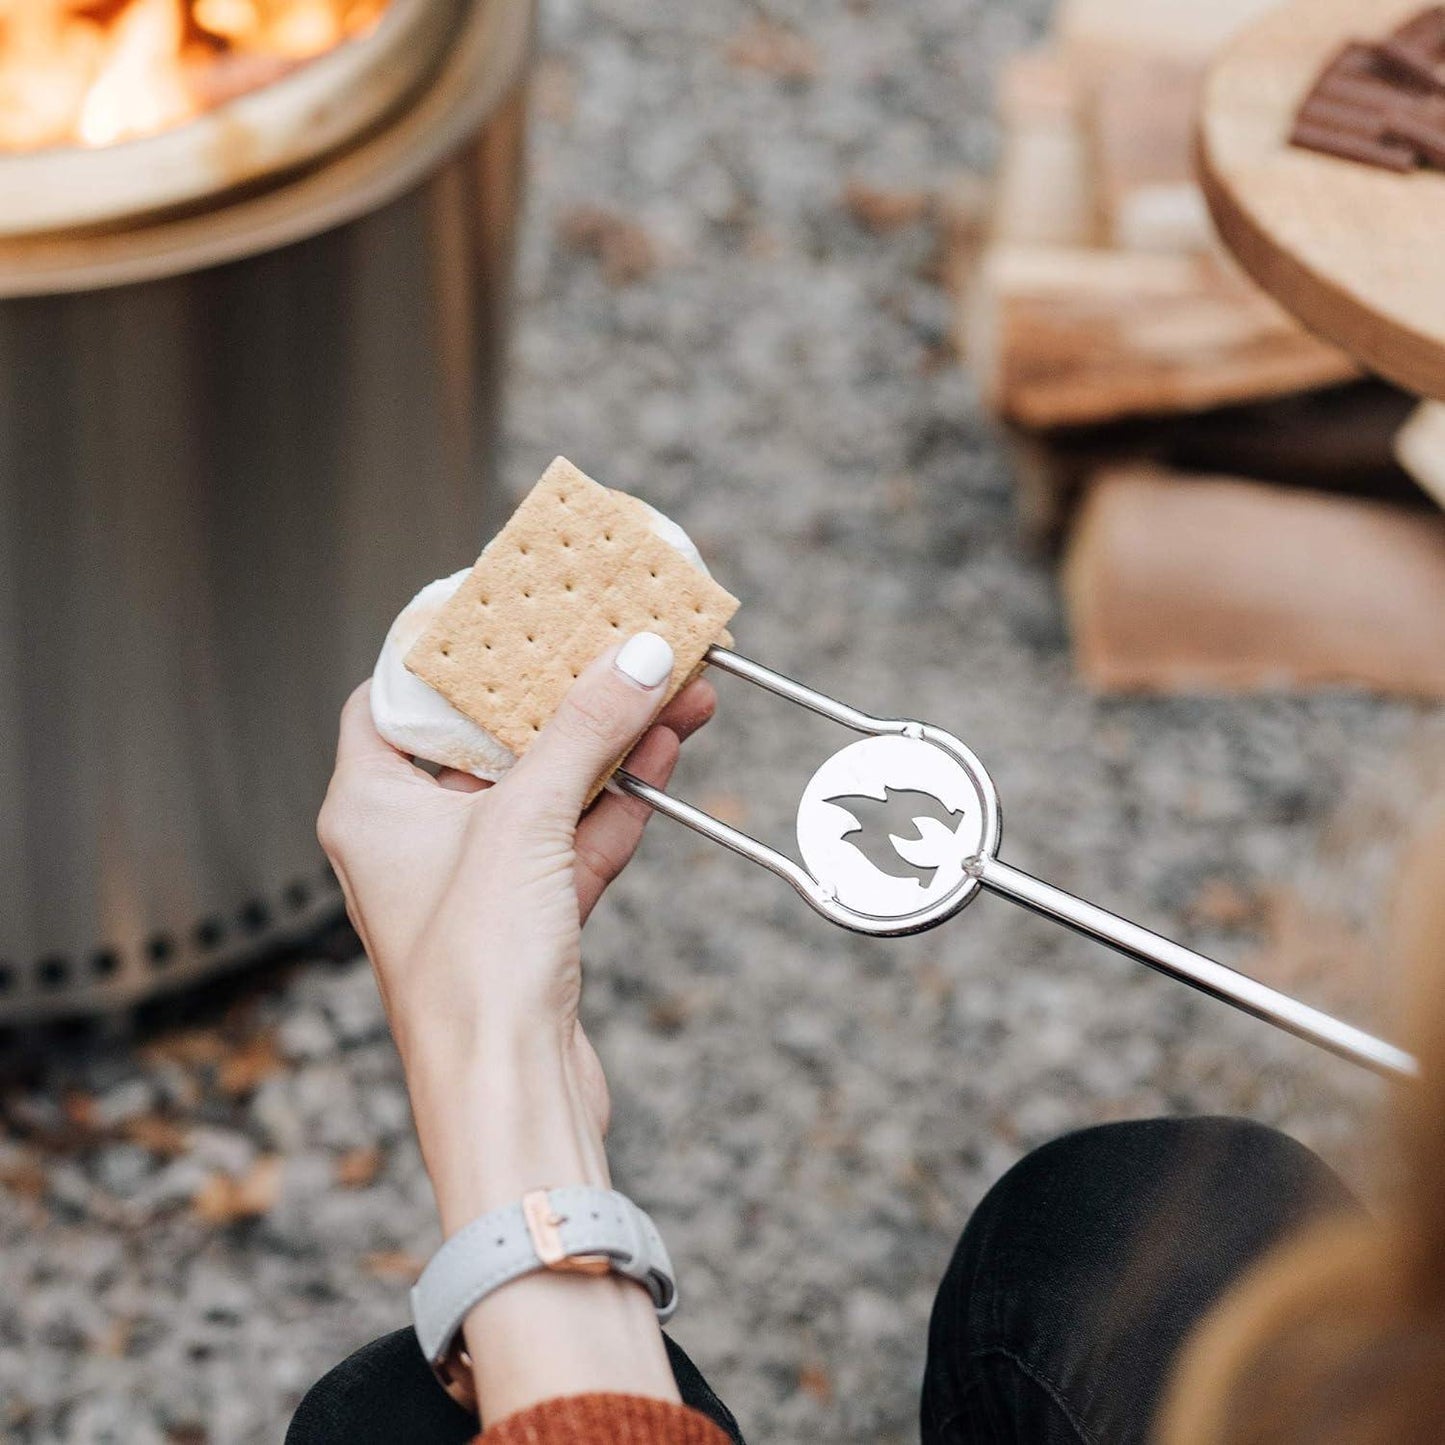 Solo Stove Roasting Sticks and Fire Pit Poker & Tongs | Great for Roasting Marshmallows, Smores and Hot Dogs | Firewood Accessories for Outdoor Fire Pits - TRAPSKI, LLC